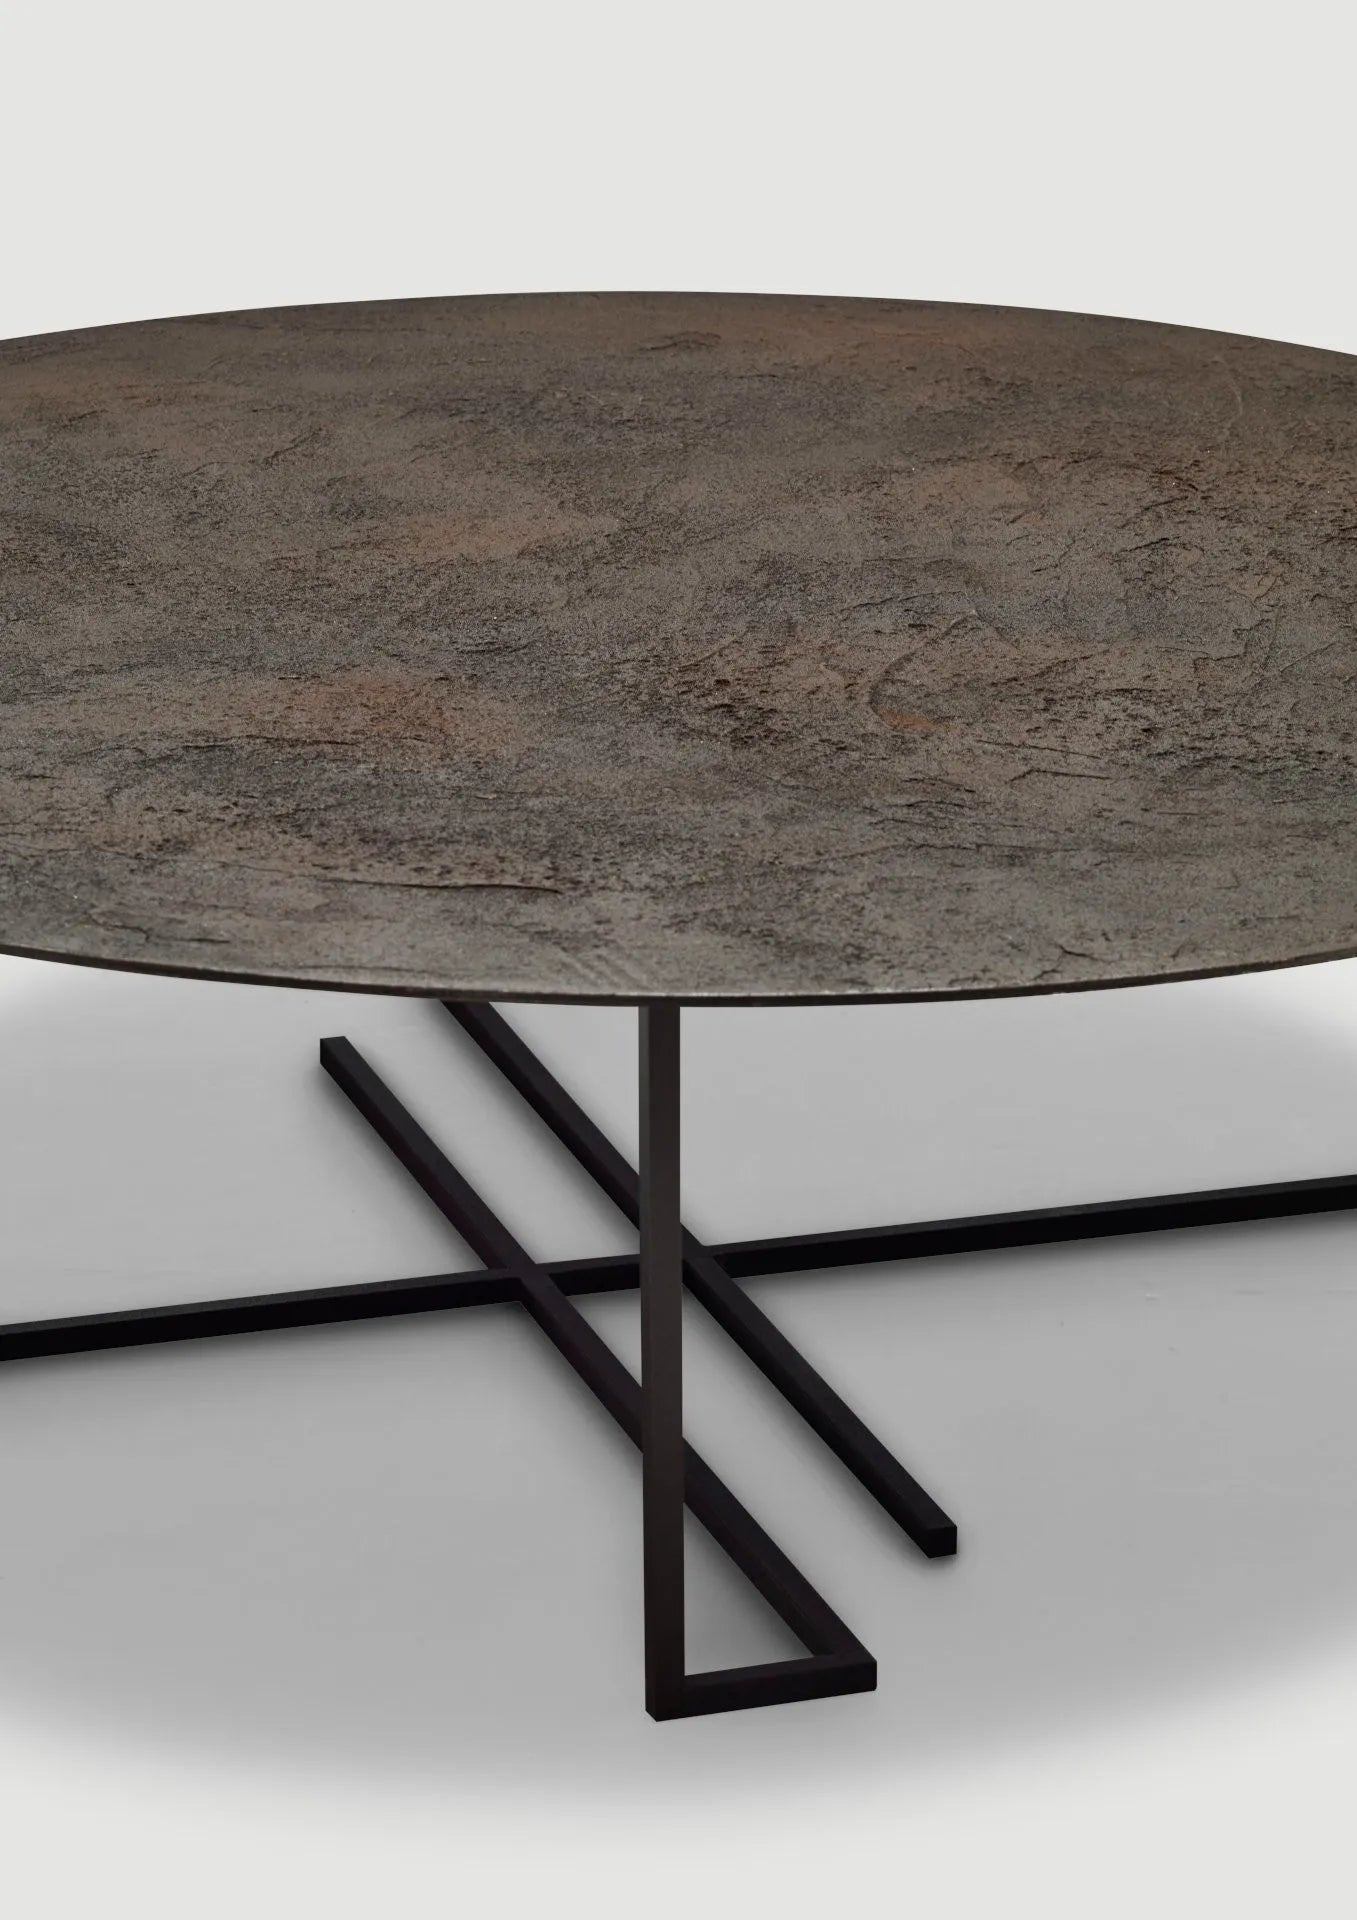 URUSHI ROUND COFFEE TABLE BY DAA - start from $5,000